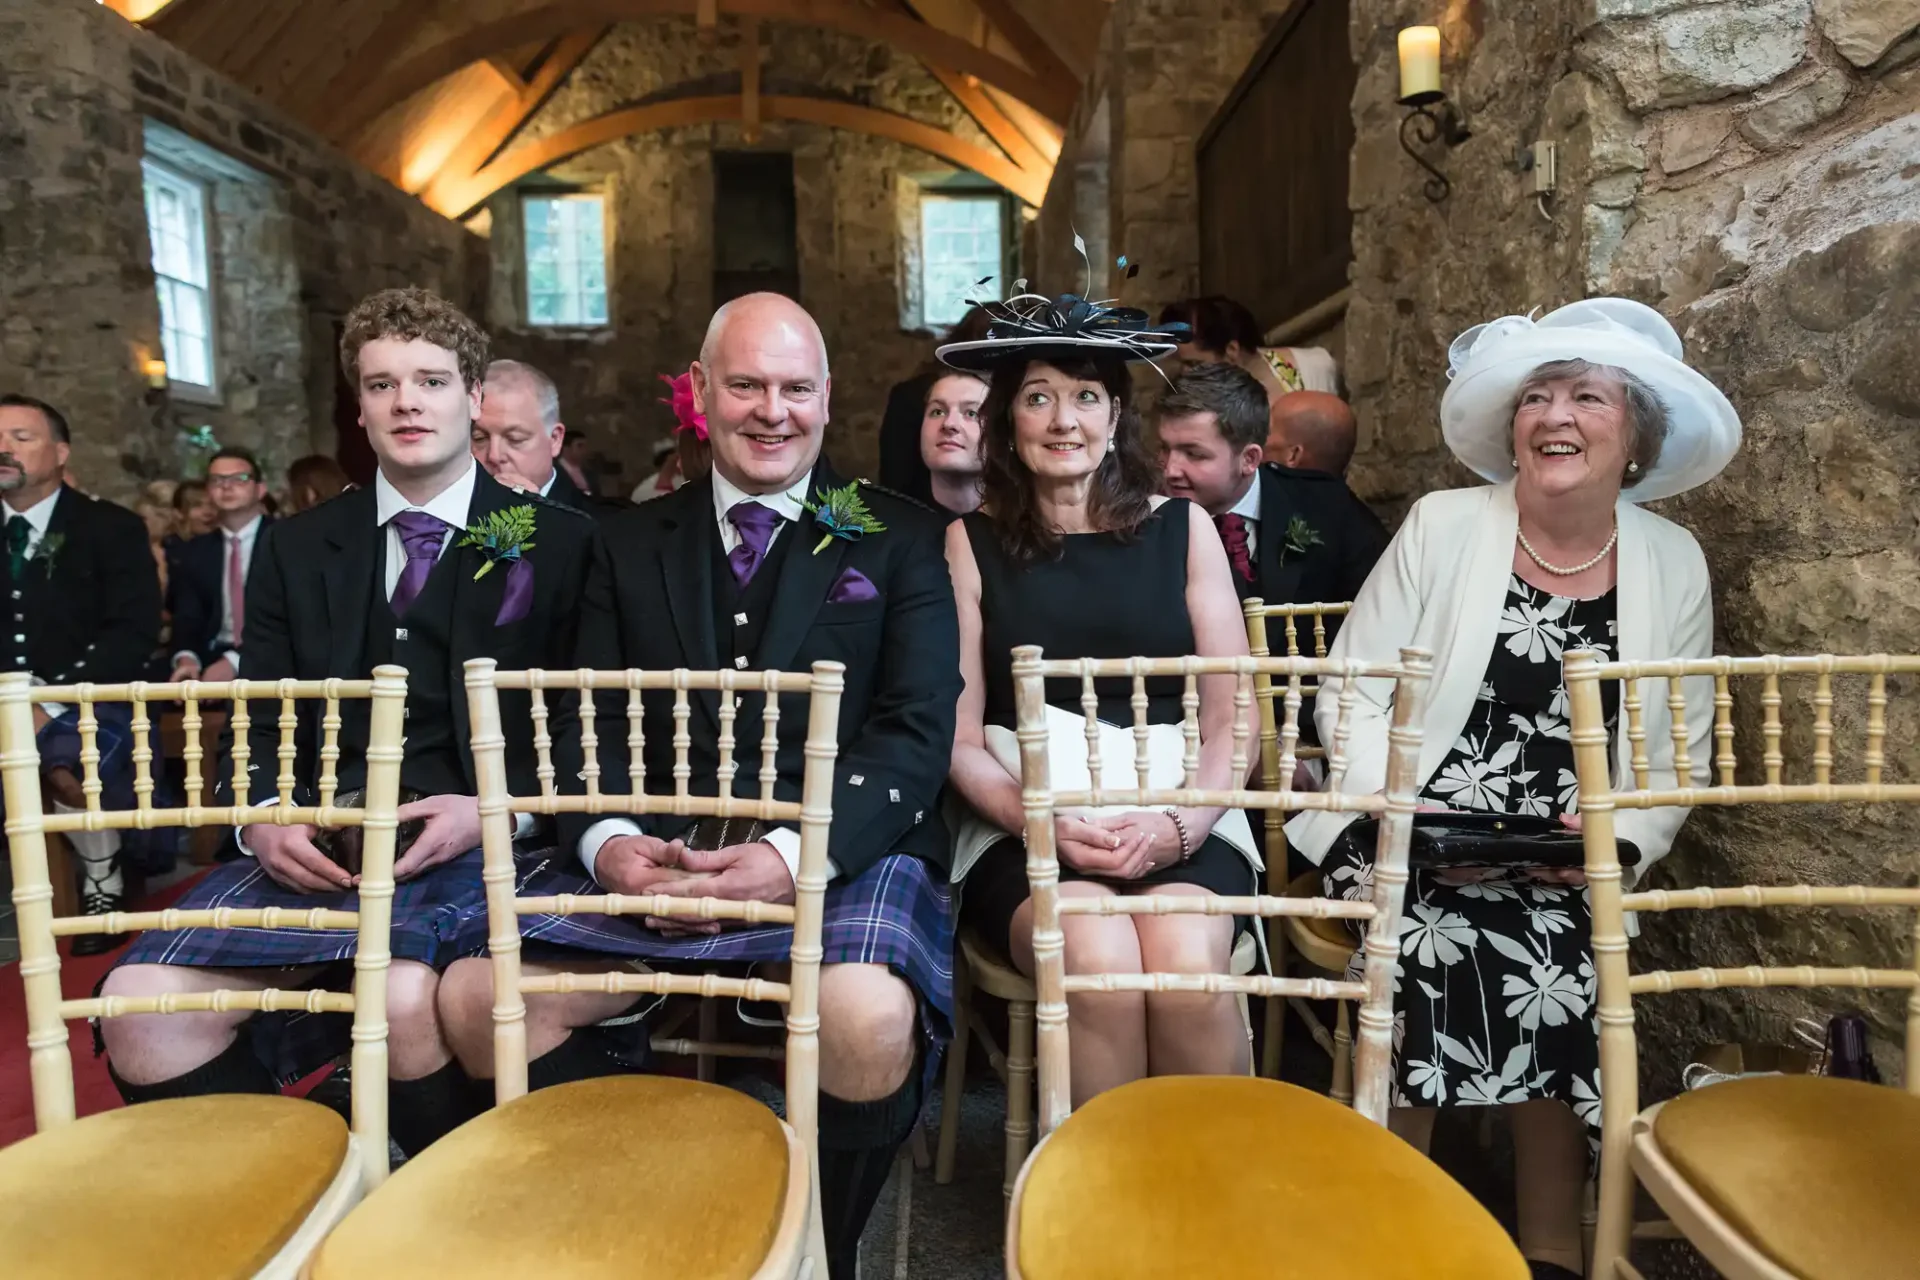 Guests at a wedding ceremony in a rustic stone hall, featuring a young man in a tartan kilt and others in formal attire, smiling as they await the event.